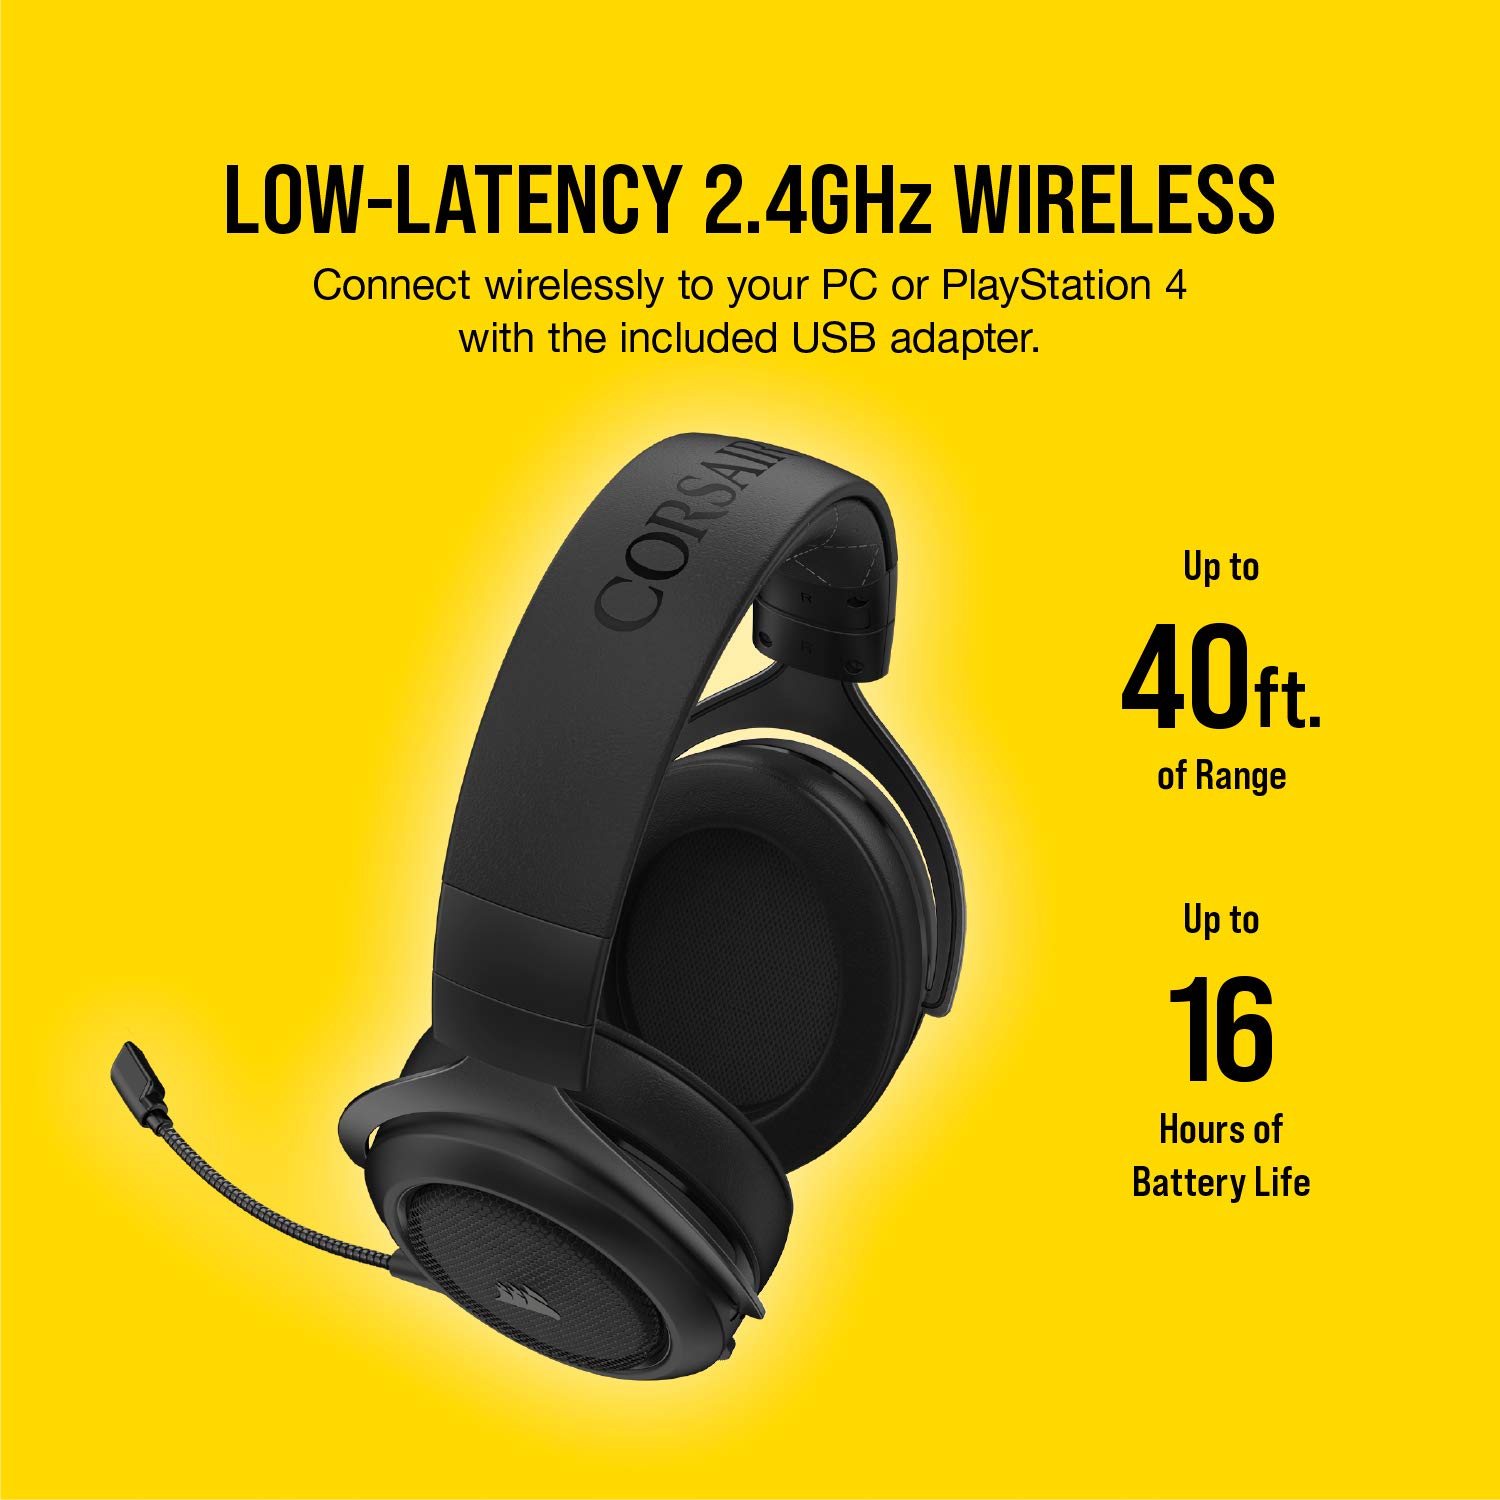 Corsair HS70 Pro Wireless Gaming Headset - 7.1 Surround Sound Headphones for PC, MacOS, PS5, PS4 - Discord Certified - 50mm Drivers – Carbon,Black